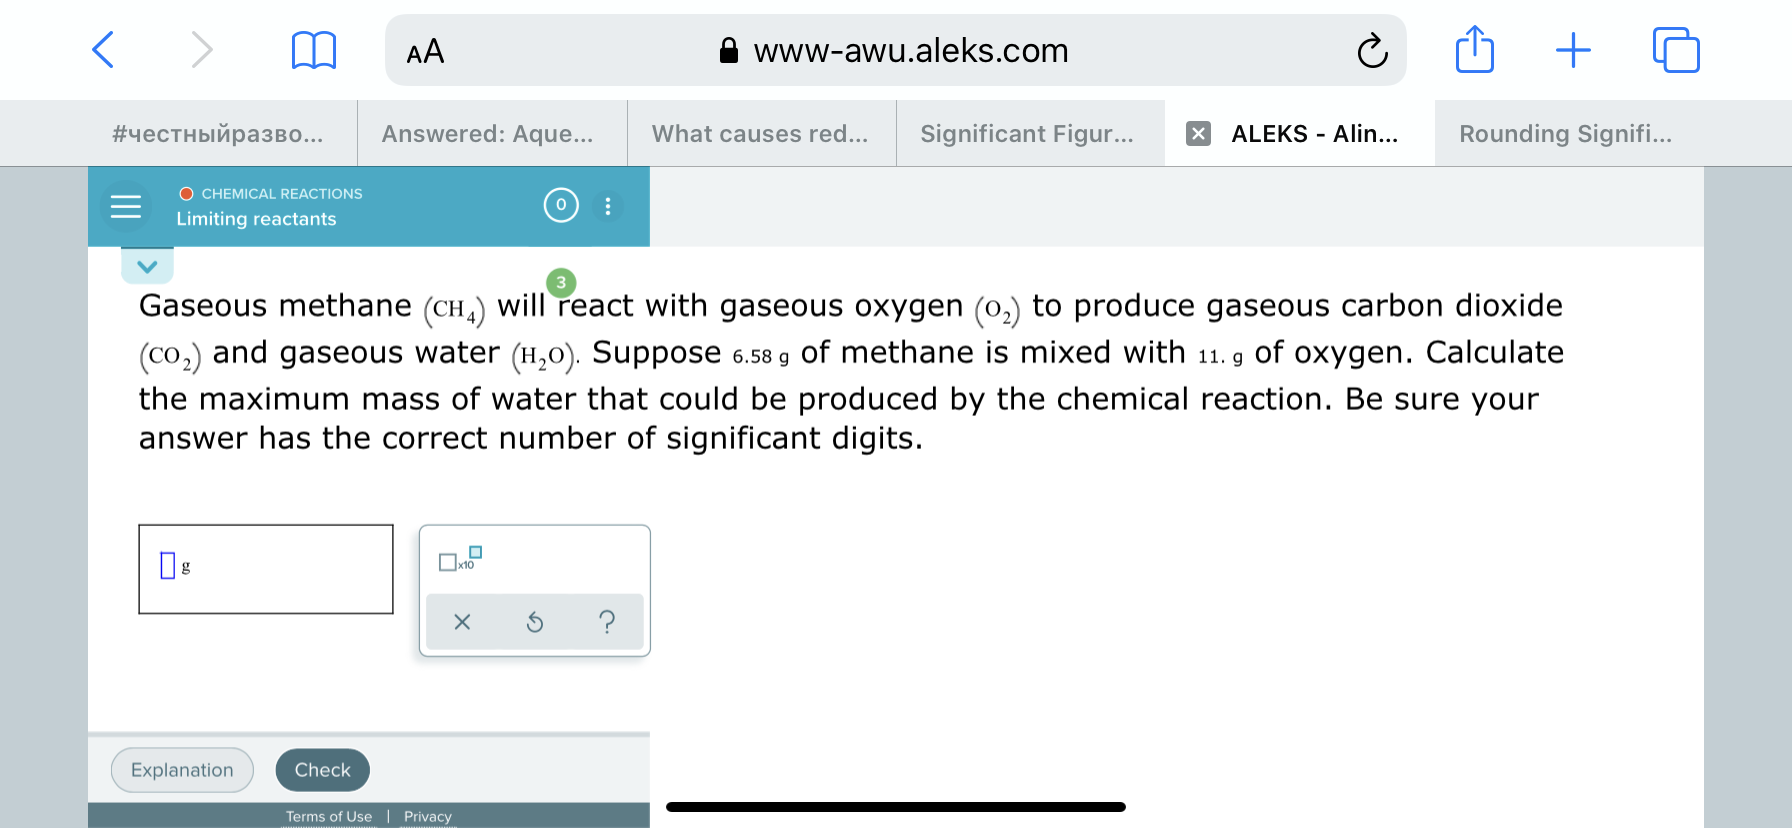 Gaseous methane (CH,) will react with gaseous oxygen (0,) to produce gaseous carbon dioxide
(co,) and gaseous water (H,0). Suppose 6.58 g of methane is mixed with 11. g of oxygen. Calculate
the maximum mass of water that could be produced by the chemical reaction. Be sure your
answer has the correct number of significant digits.
